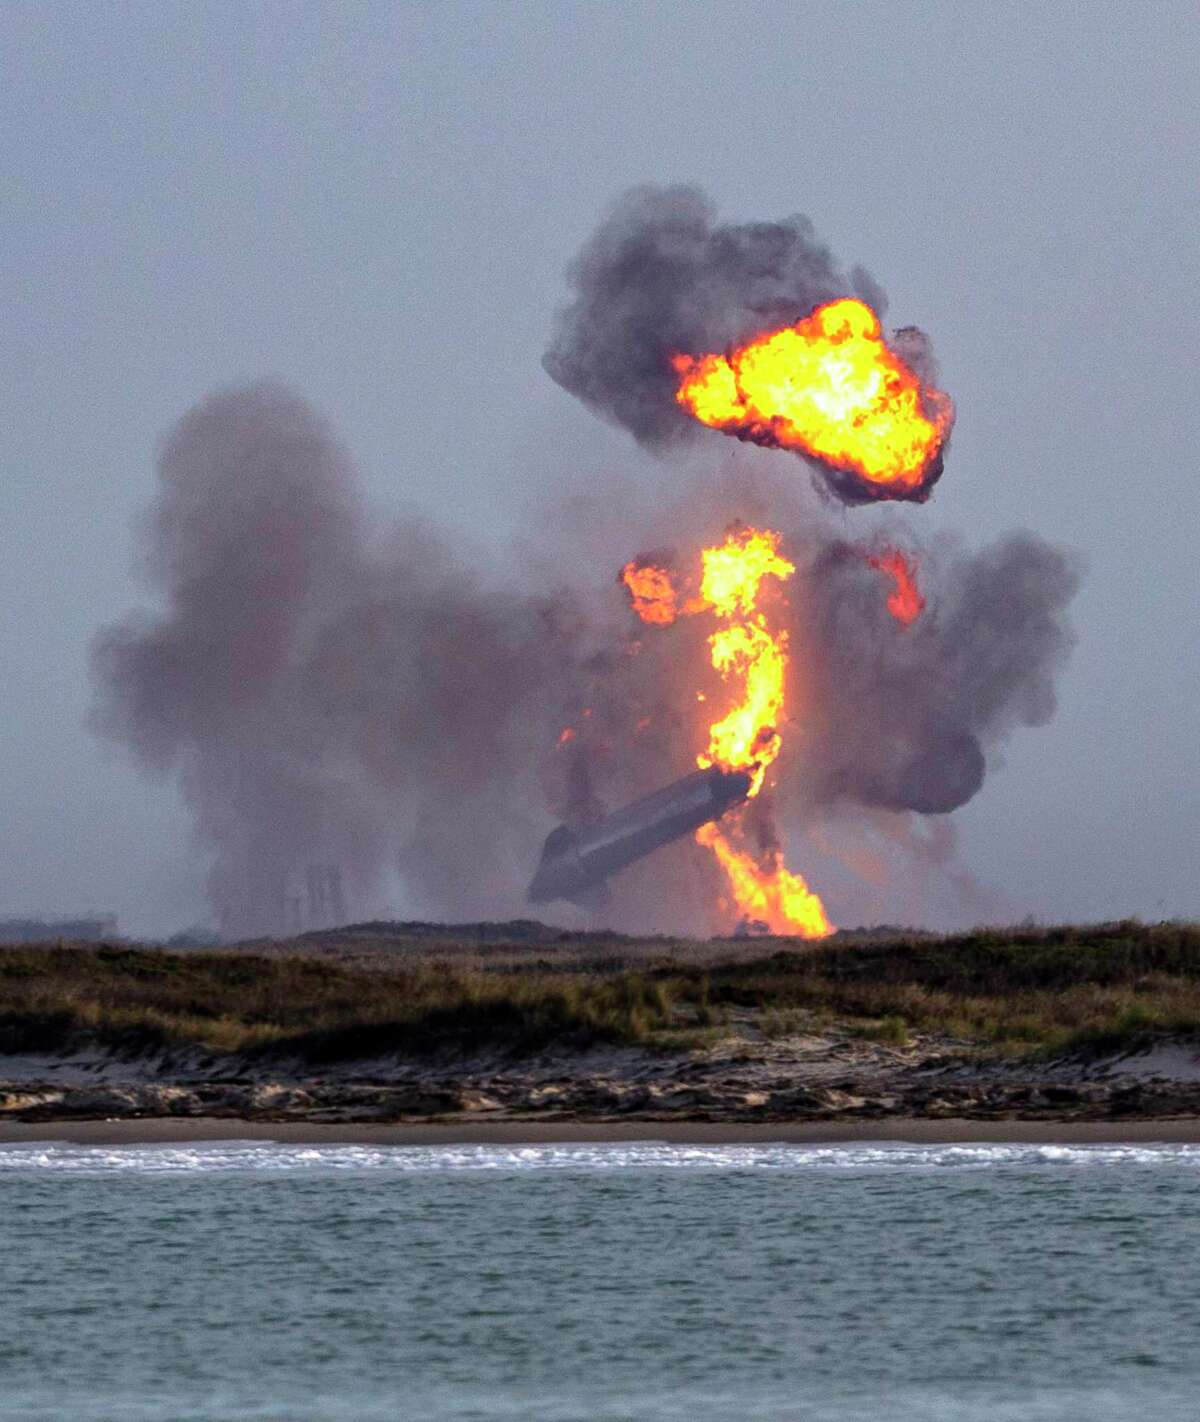 The SpaceX Starship SN10 explodes Wednesday, March 3, 2021 after landing in Boca Chica. The spacecraft prototype landed and stood at an angle before catching fire and exploding.